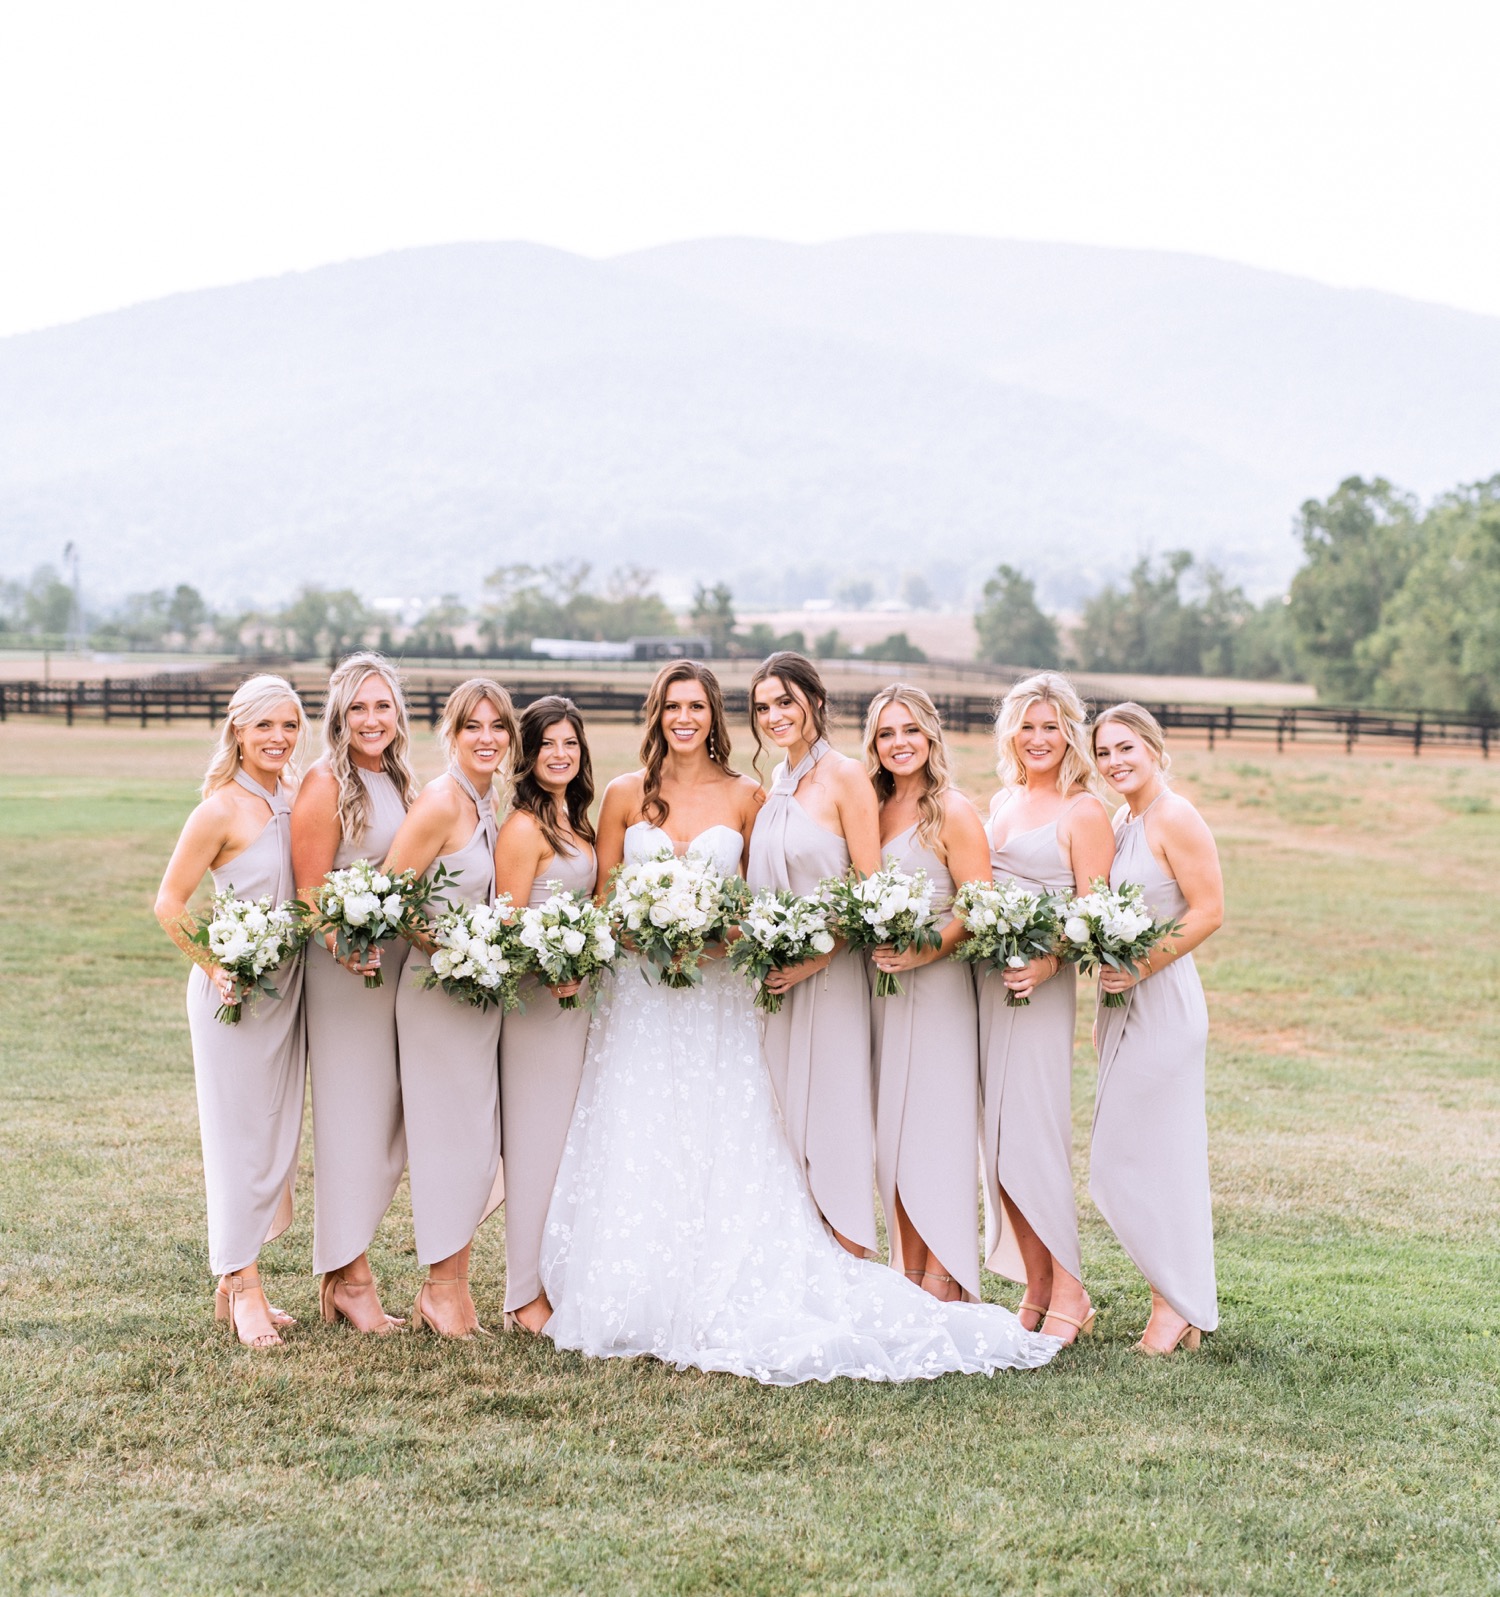 bride and bridesmaids in their taupe colored bridesmaids dresses celebrating the Charlottesville wedding day